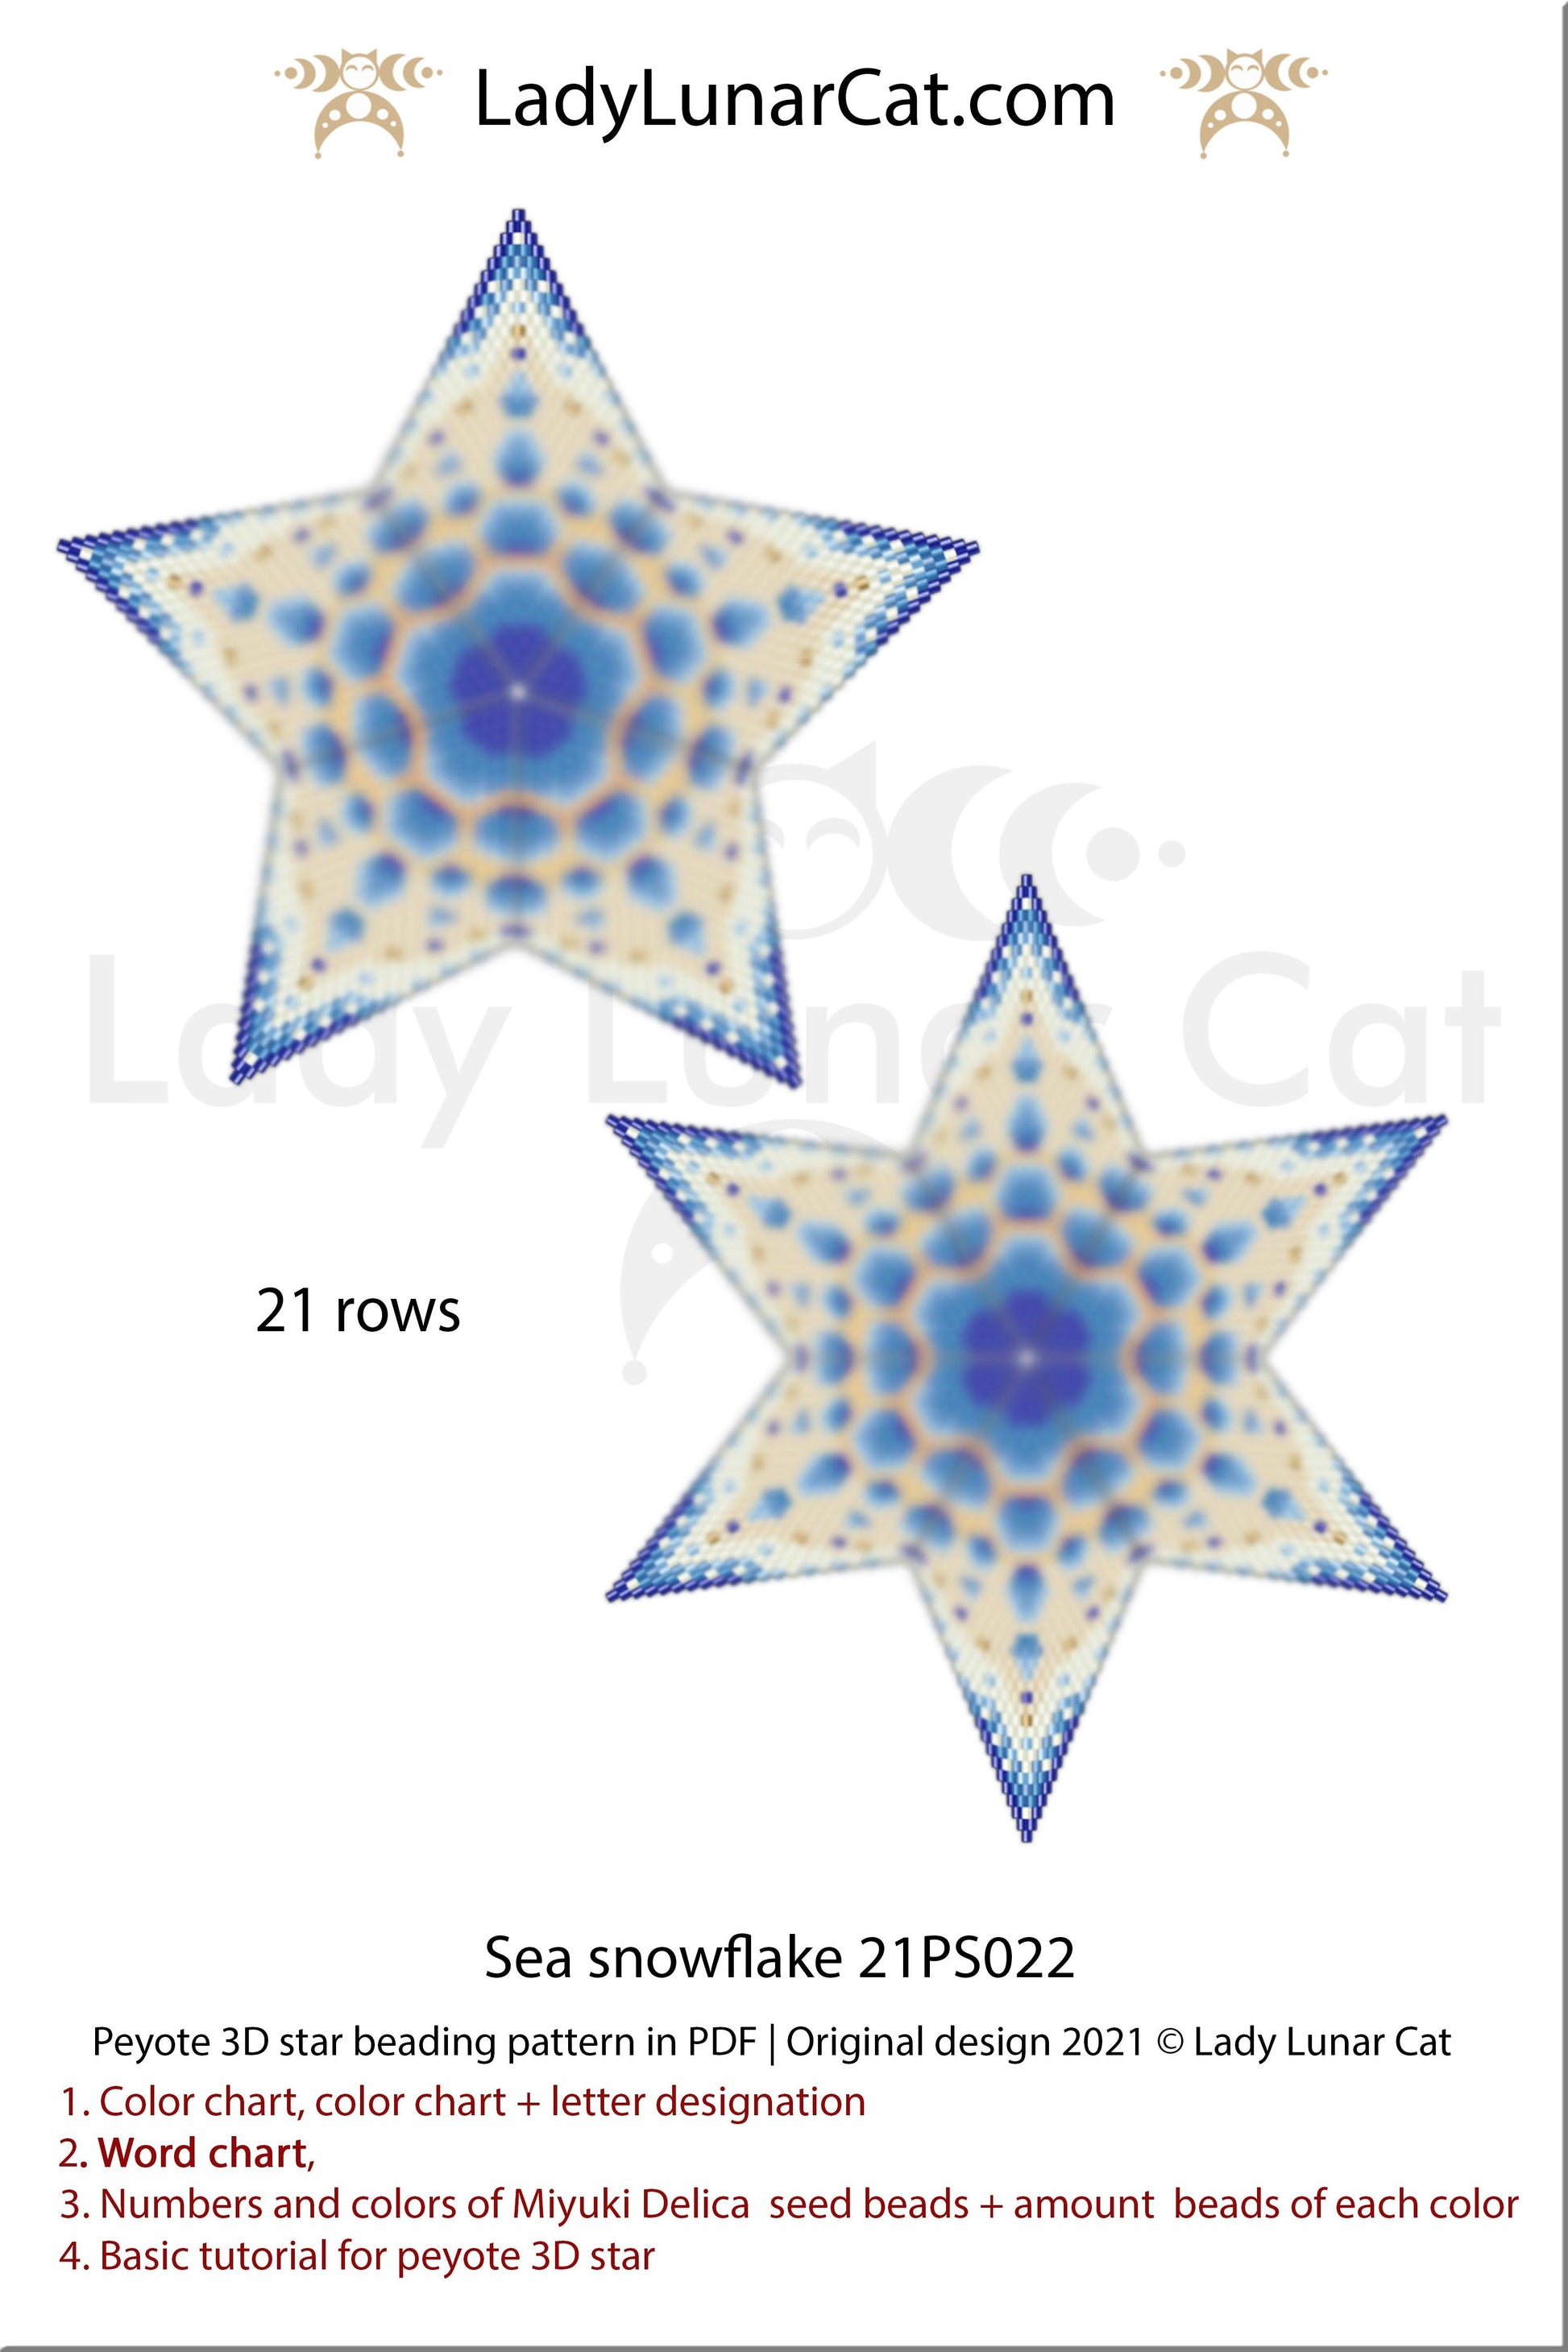 Beaded star pattern for beading- Sea snowflake 21PS022 21 rows LadyLunarCat